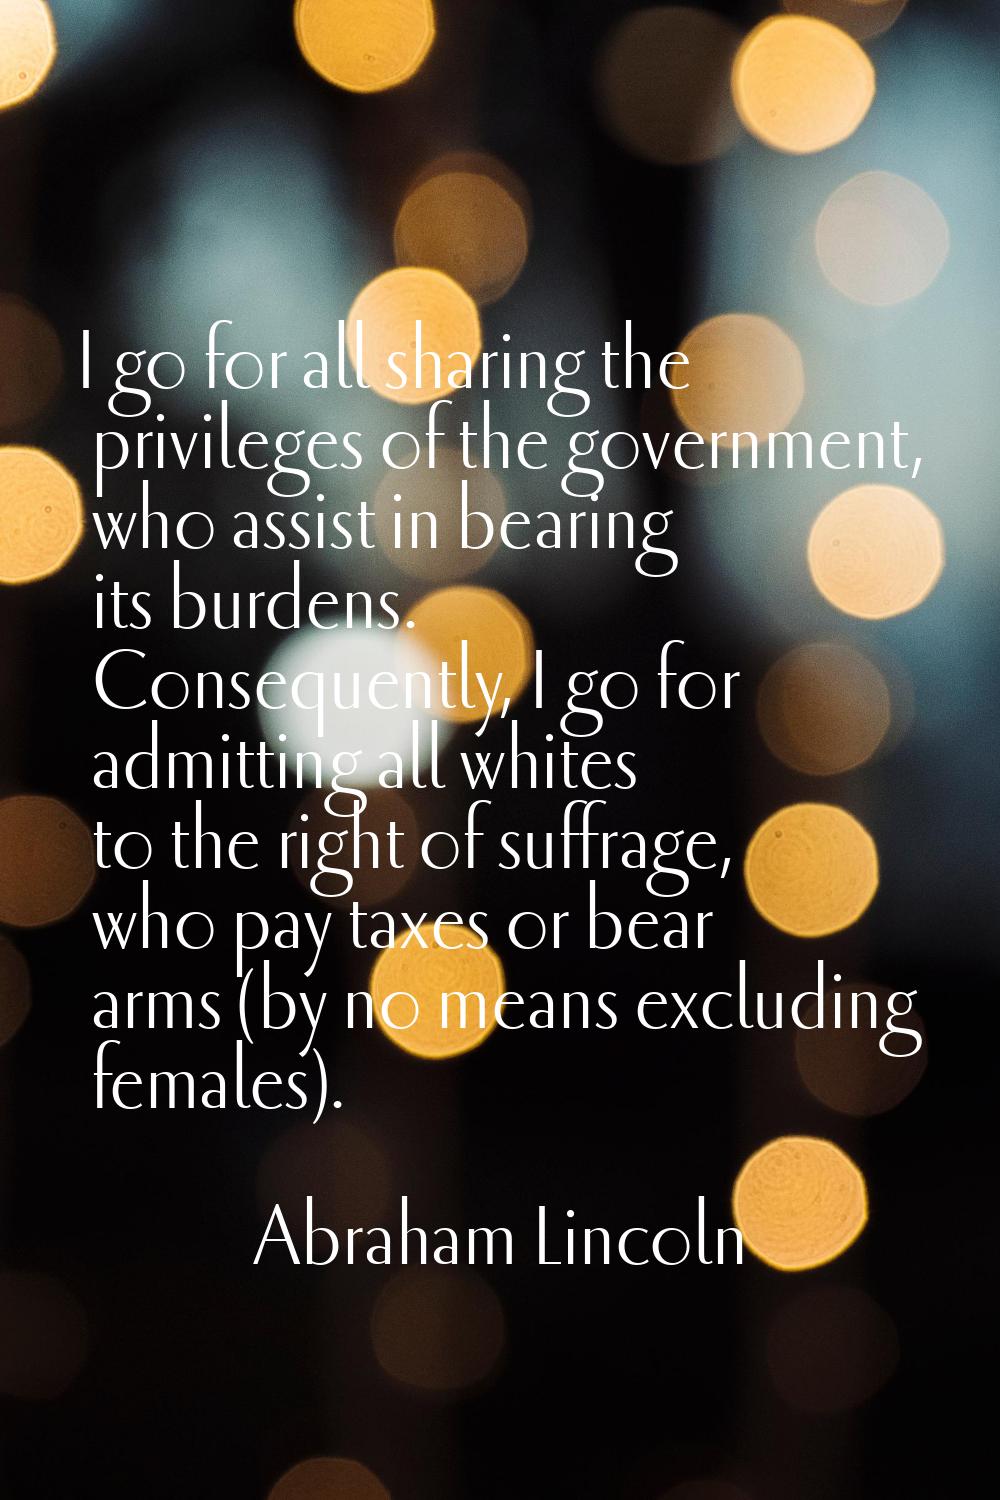 I go for all sharing the privileges of the government, who assist in bearing its burdens. Consequen